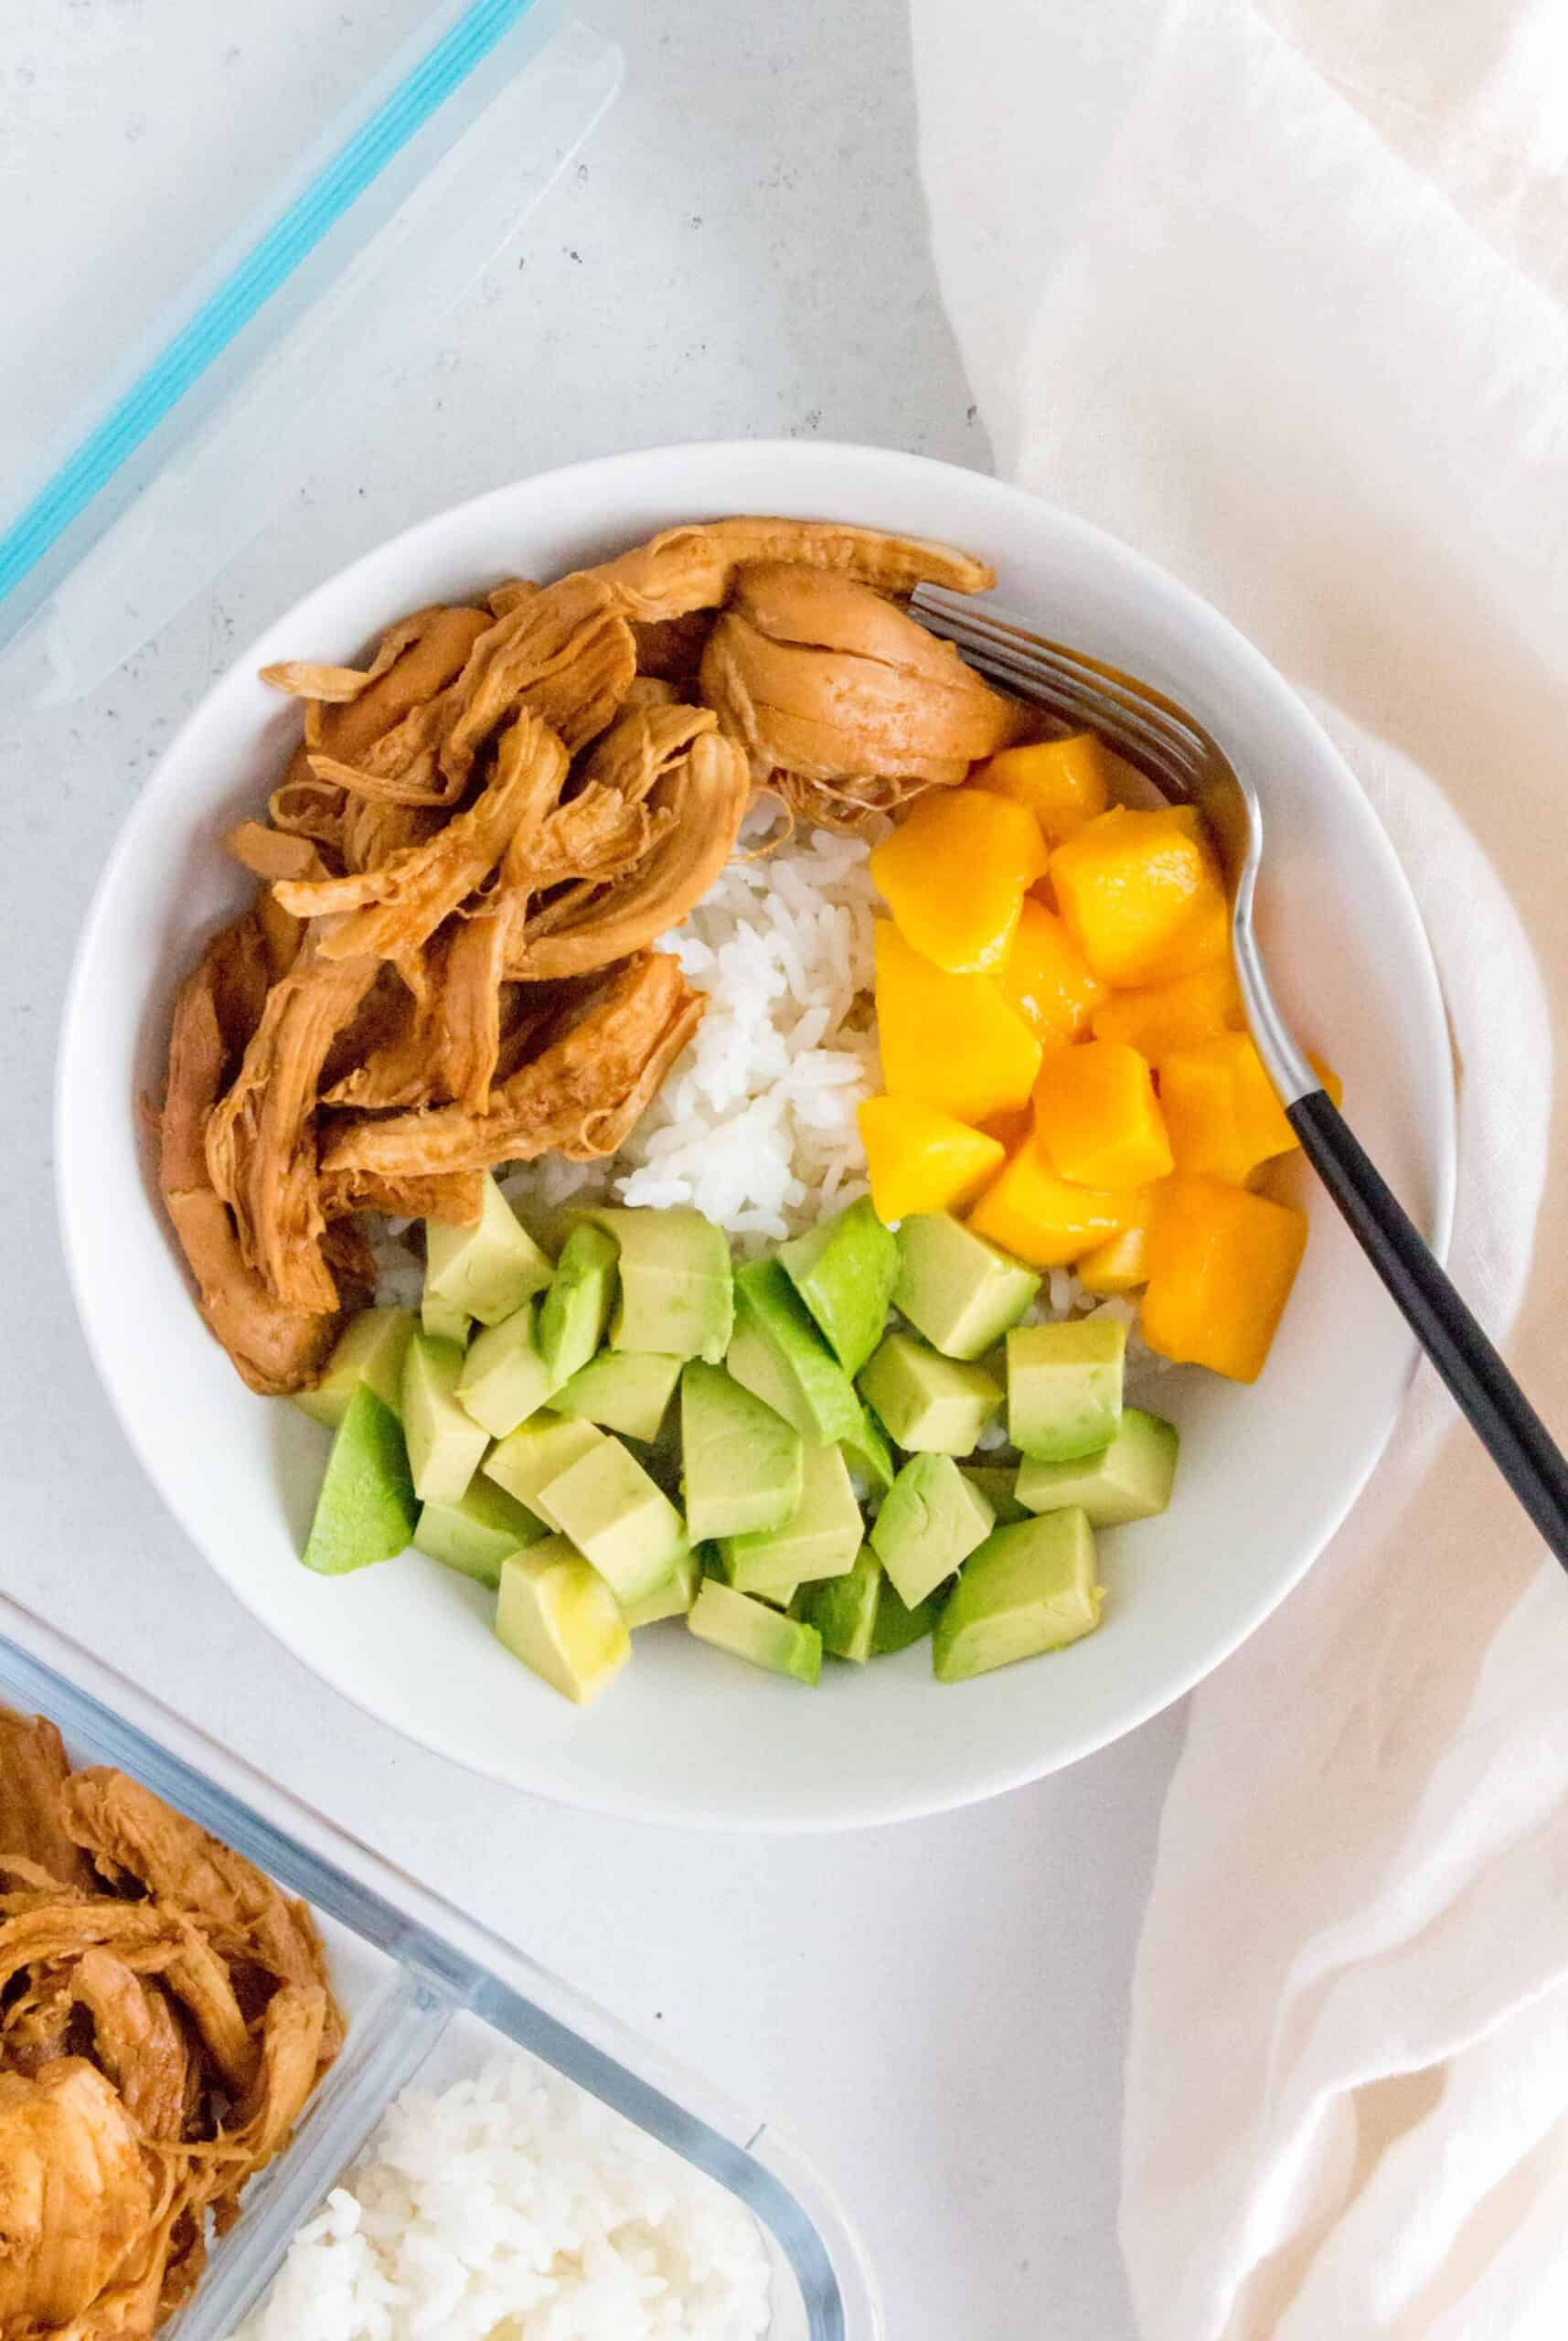 Serve this tangy Instant Pot Shredded Hawaiian Chicken over a bed of fluffy rice and you've got the perfect last minute dinner idea! 